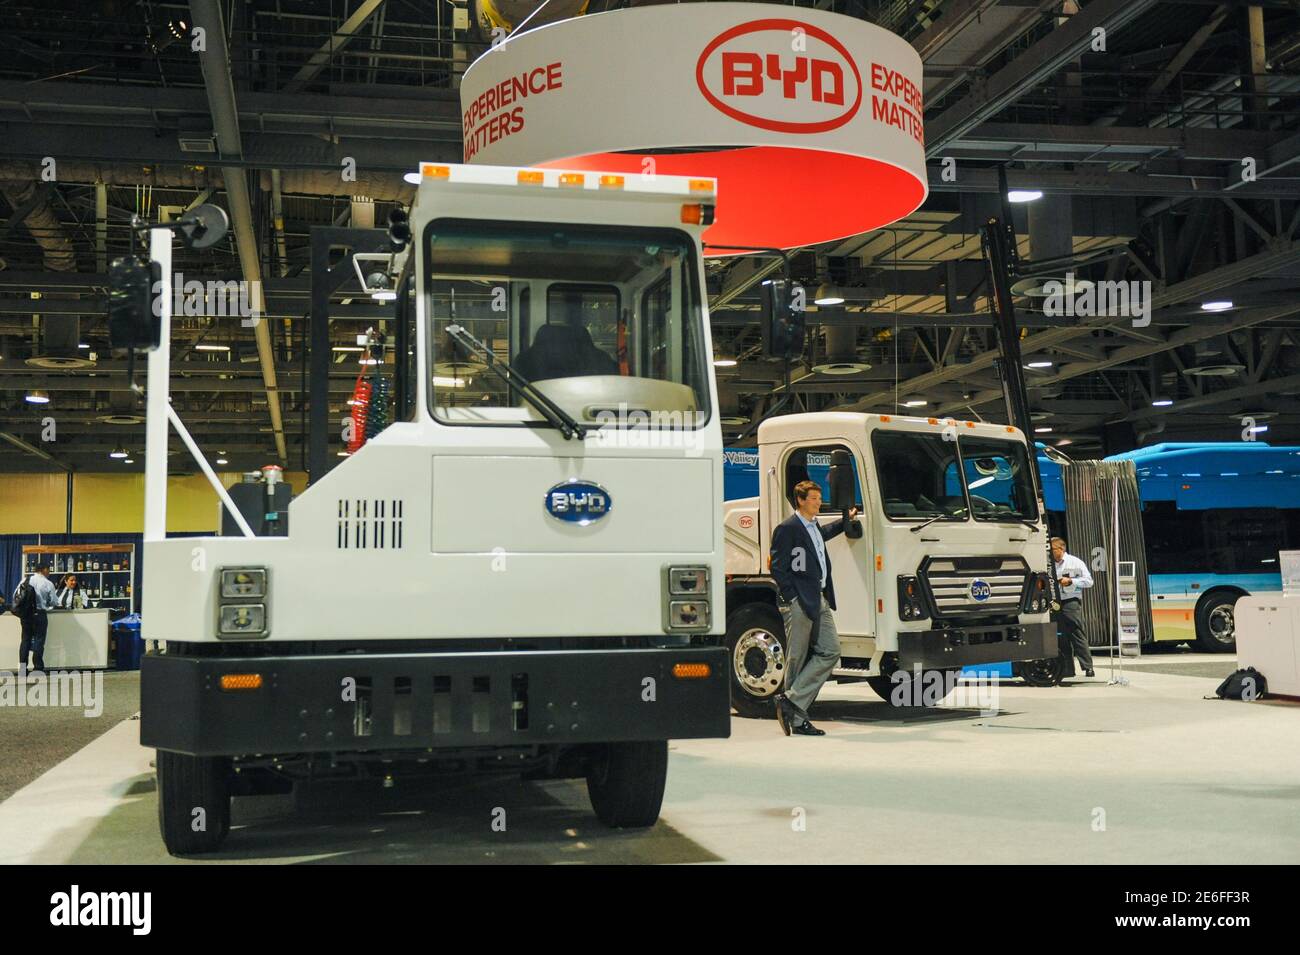 The BYD8Y (L) and the BYD8R, both plug-in electric trucks, are displayed at the BYD booth during the Advanced Clean Transportation Expo, held at the Long Beach Convention Center in Long Beach, California, U.S. May 3, 2017. REUTERS/Andrew Cullen Stock Photo